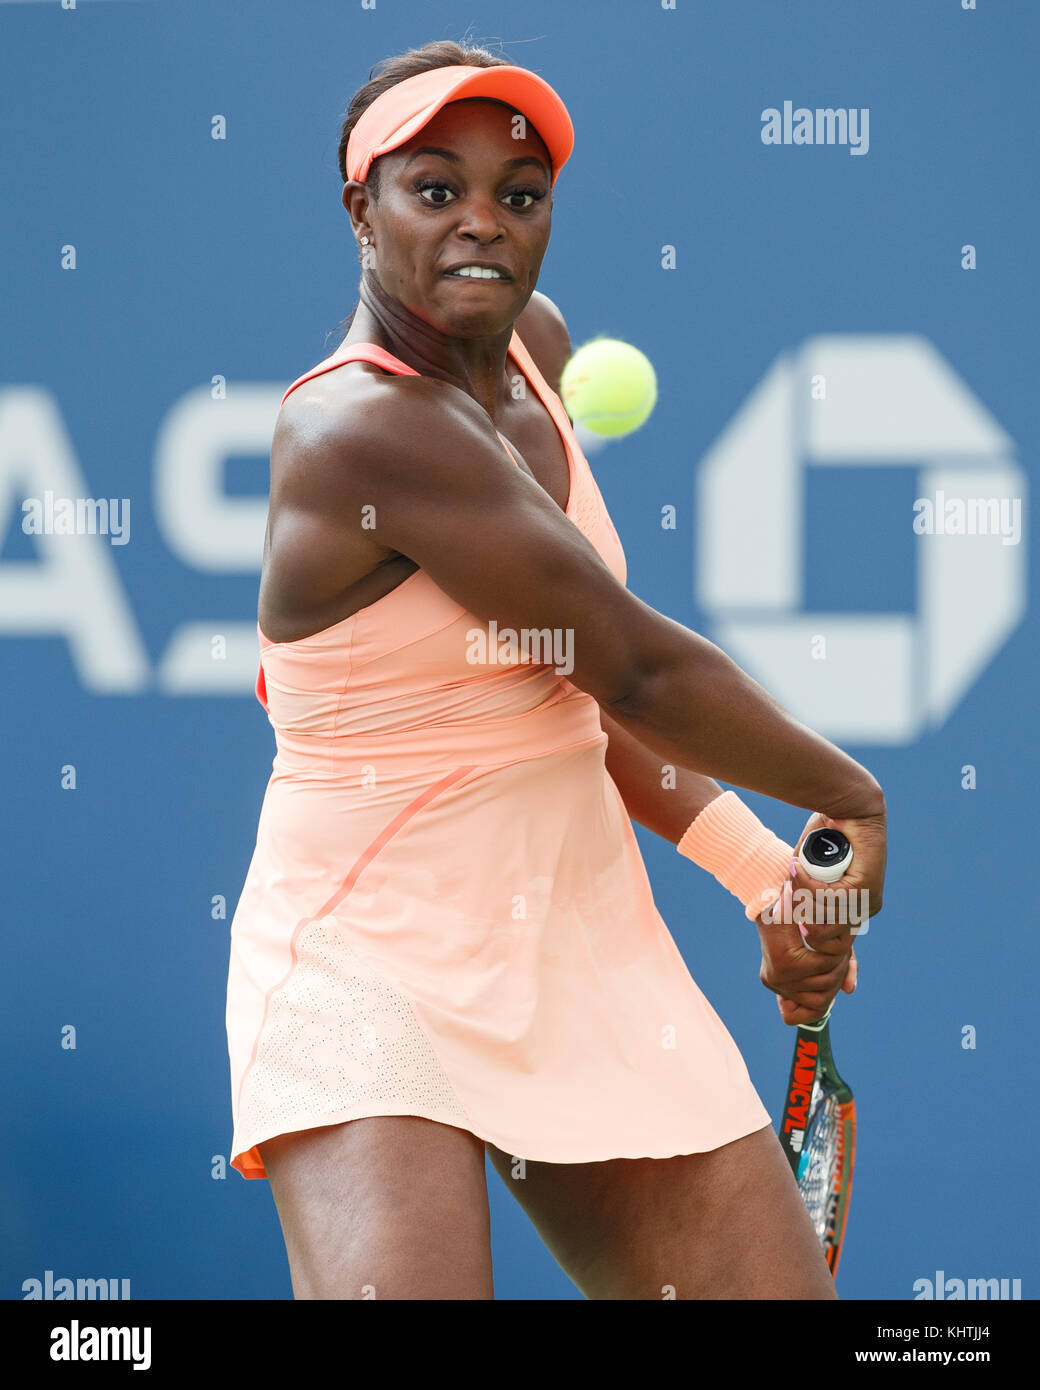 American tennis player SLOANE STEPHENS (USA) hitting a backhand shot during women's singles match at US Open 2017 Tennis Championship, New York City,  Stock Photo